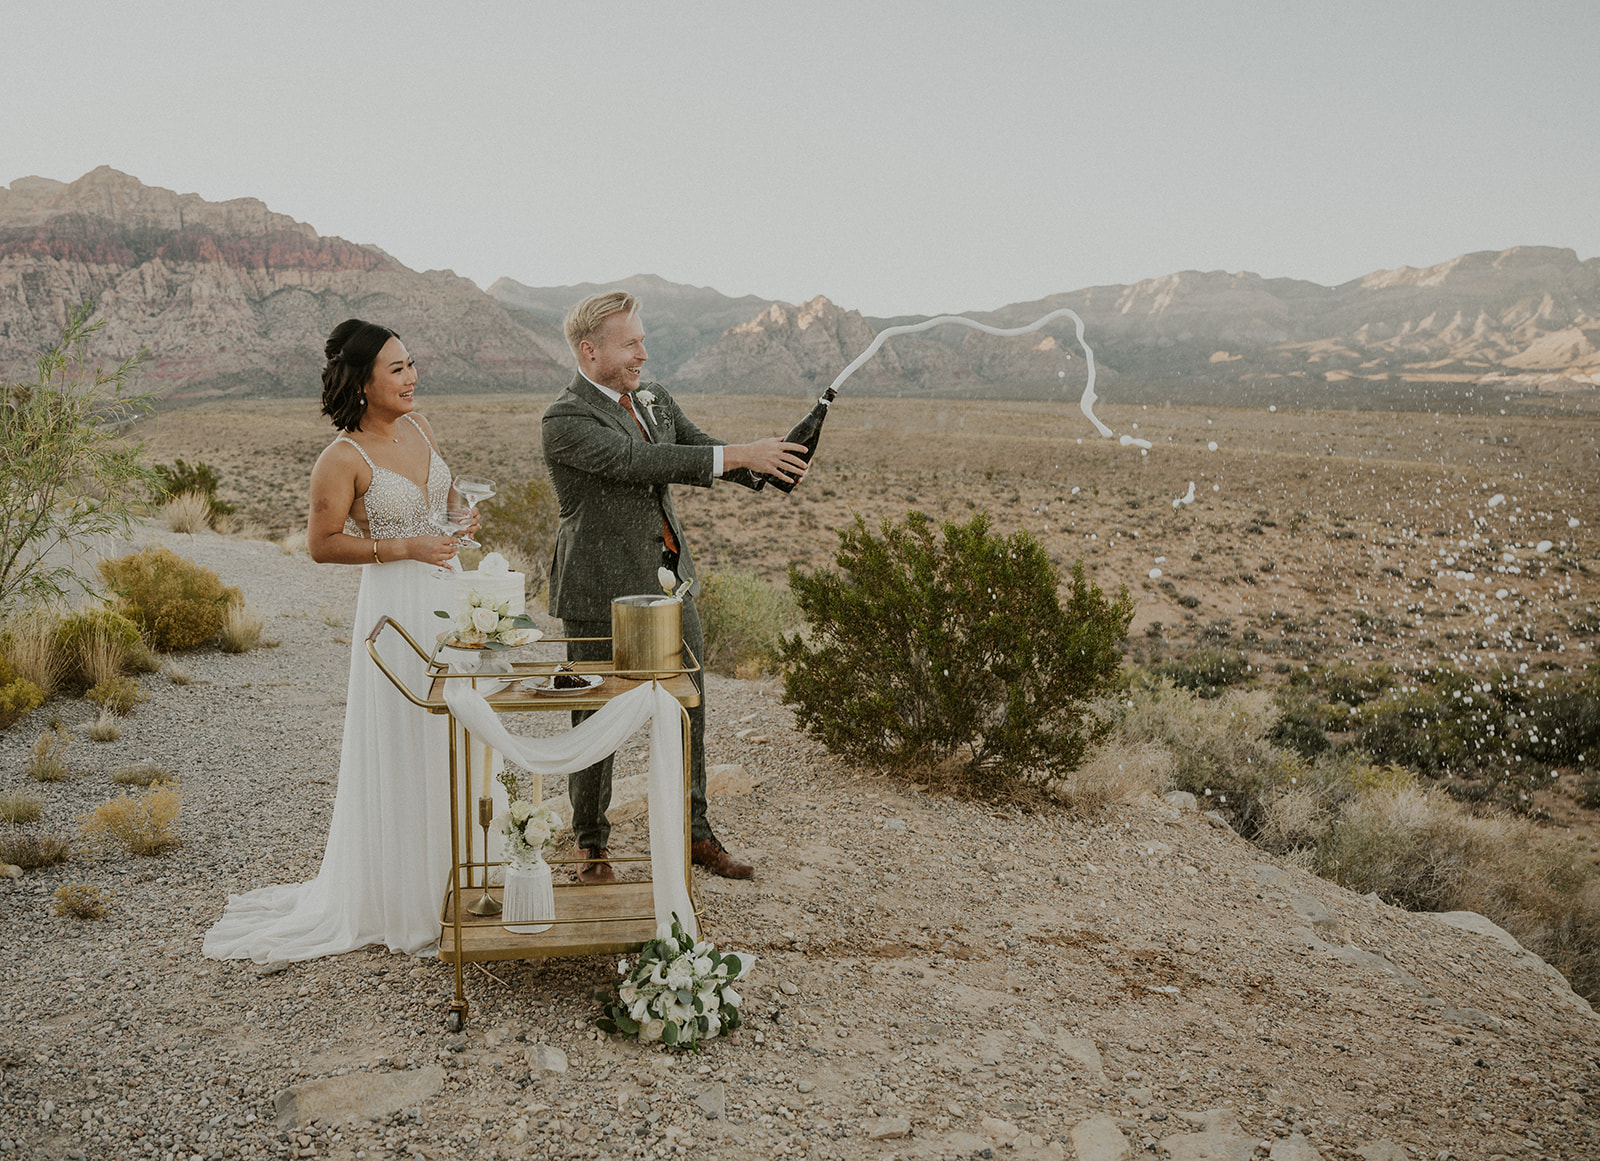 Micro wedding celebration in Red Rock Canyon